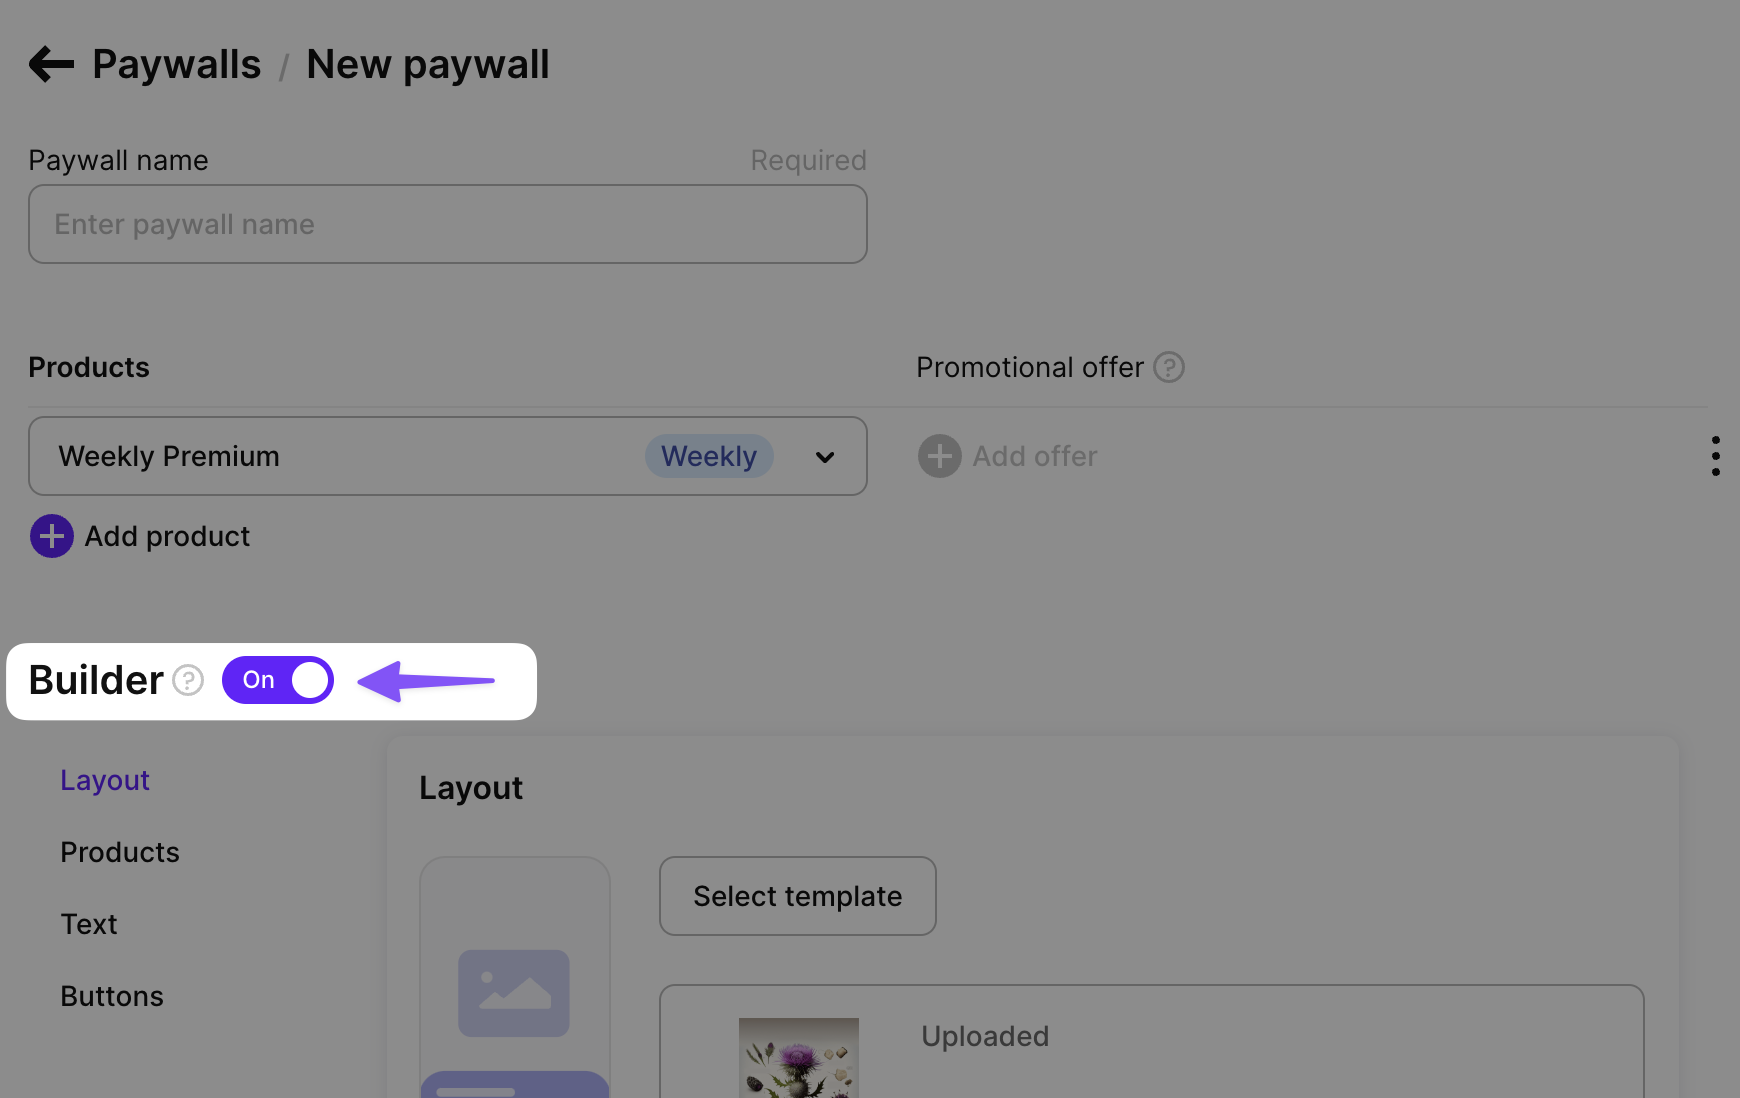 Turn on a toggle on the page of paywall creation/editing to enable the paywall builder